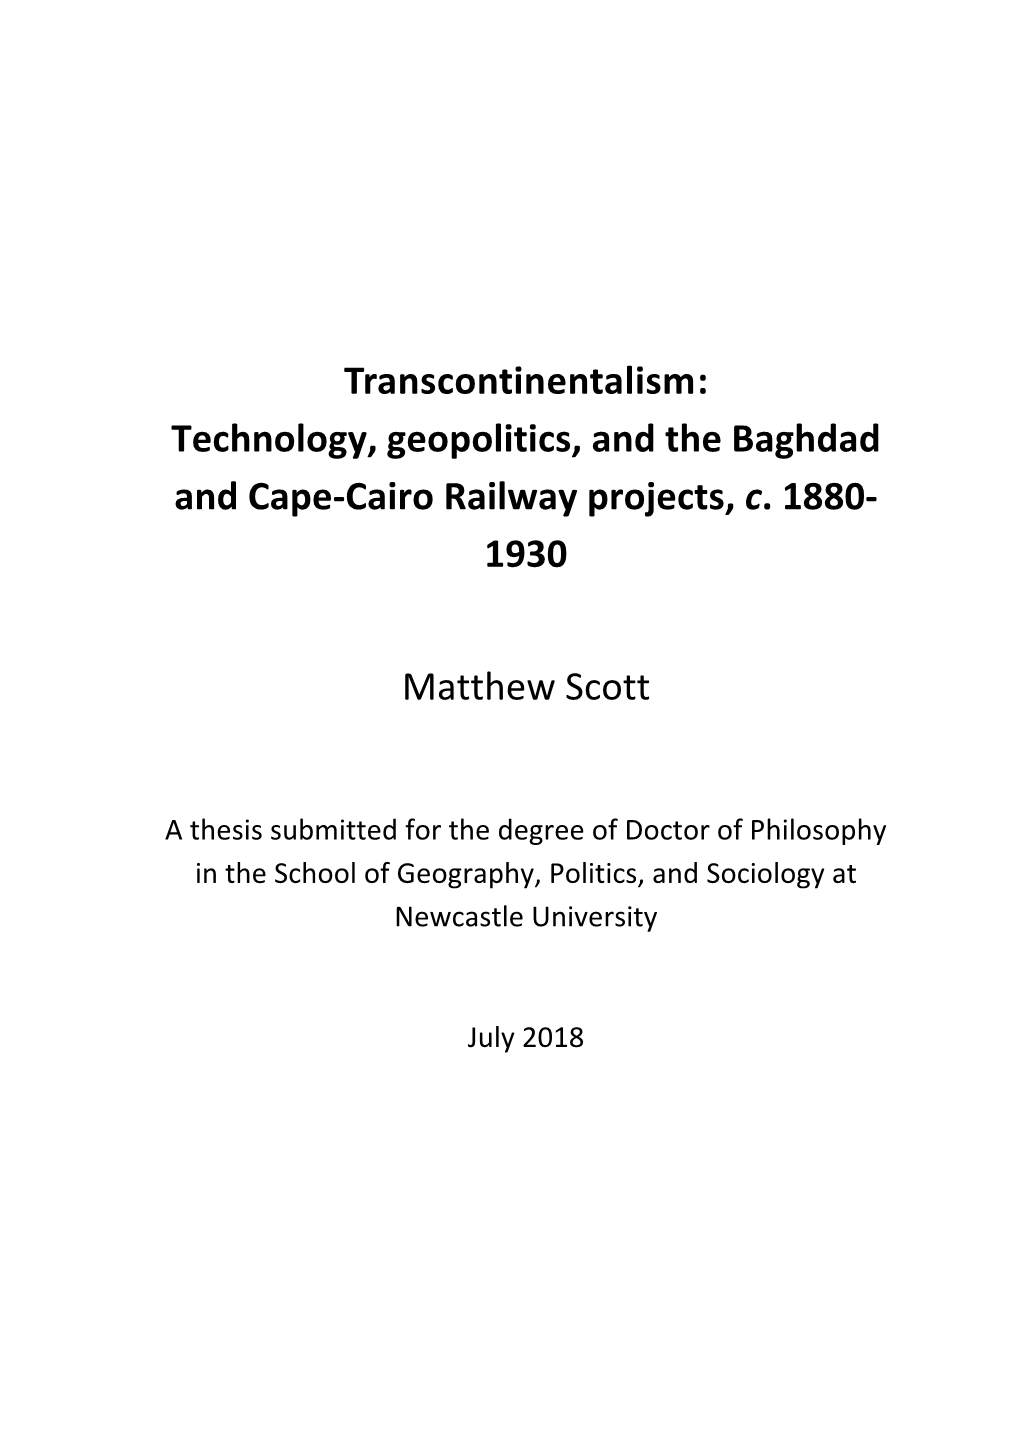 Transcontinentalism: Technology, Geopolitics, and the Baghdad and Cape-Cairo Railway Projects, C